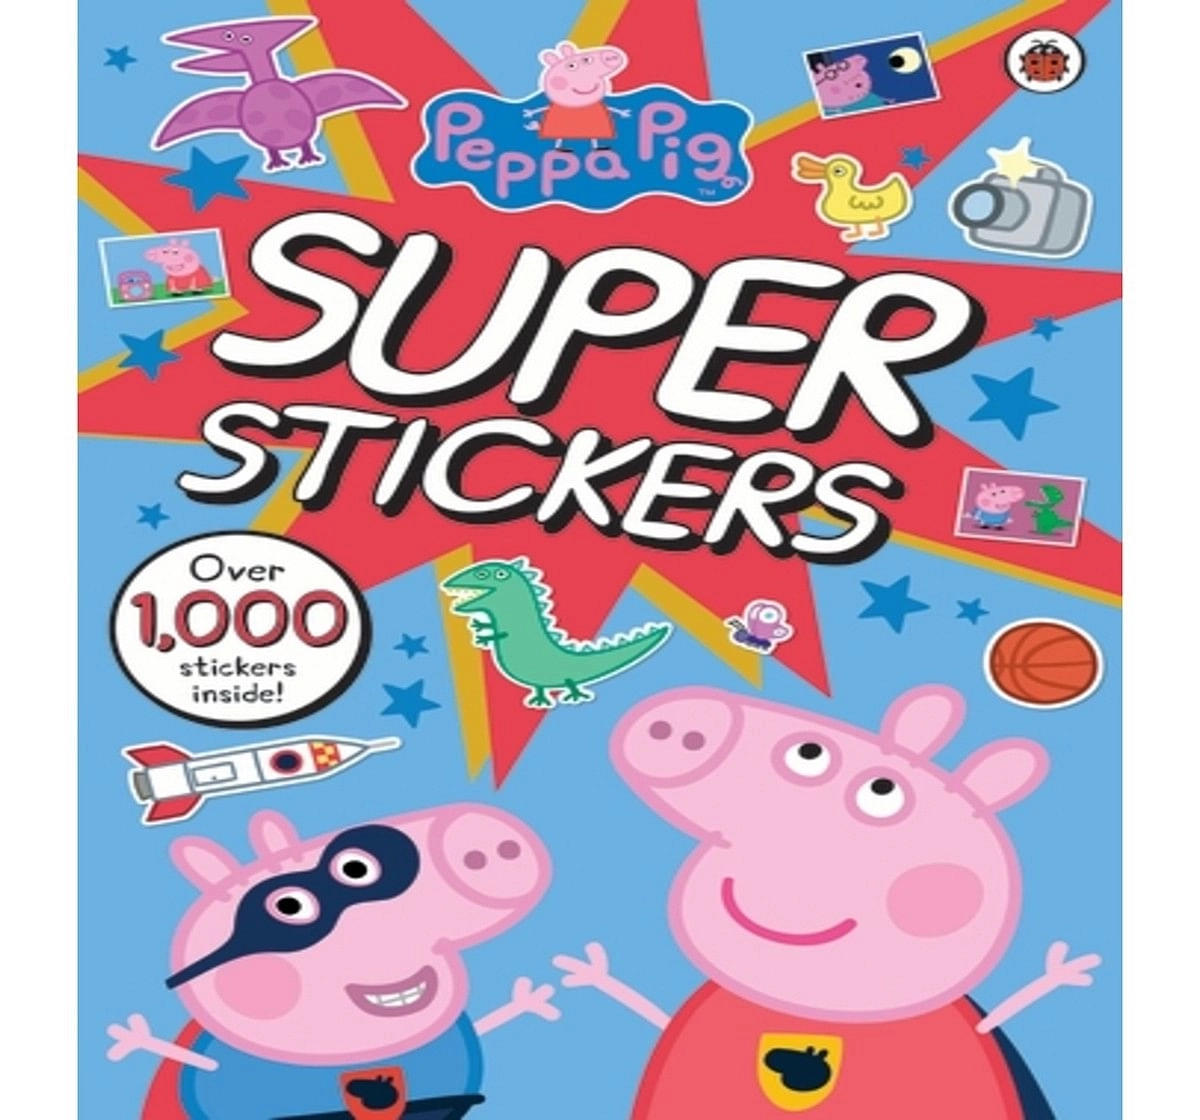 Peppa Pig Super Stickers Activity Book, 64 Pages Book by Ladybird, Paperback